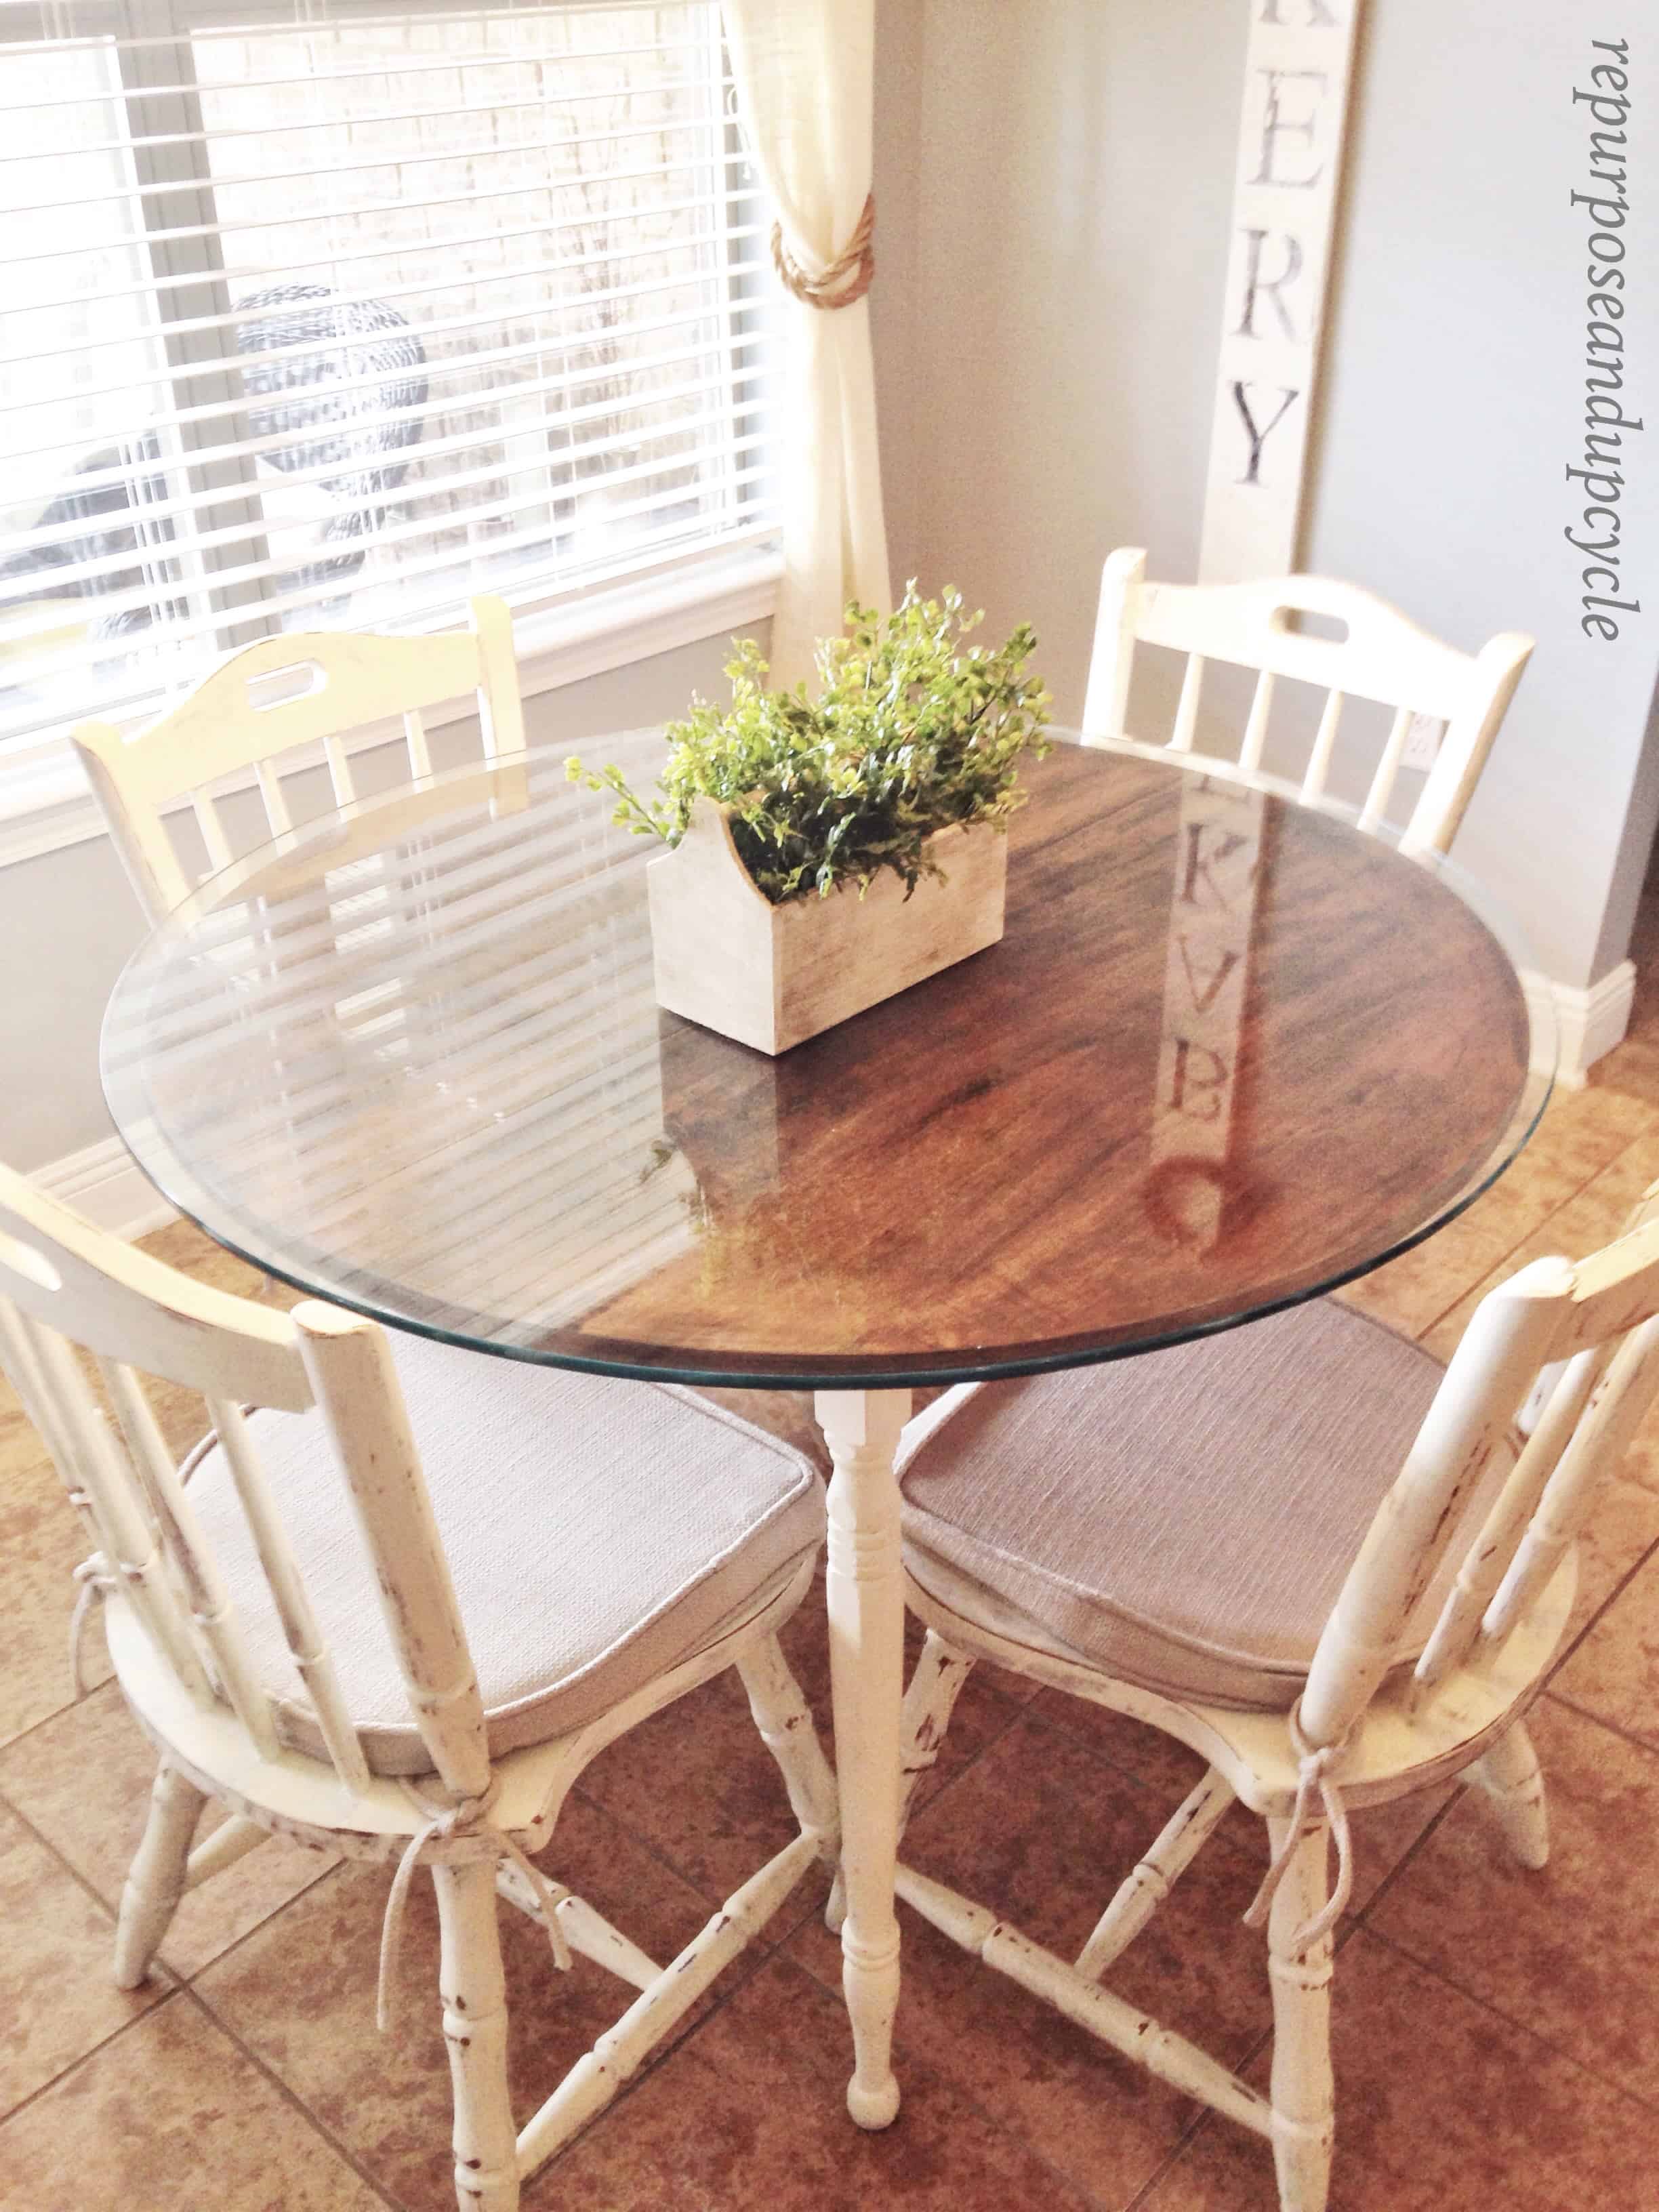 CHALK PAINT Dining Room TABLE makeover